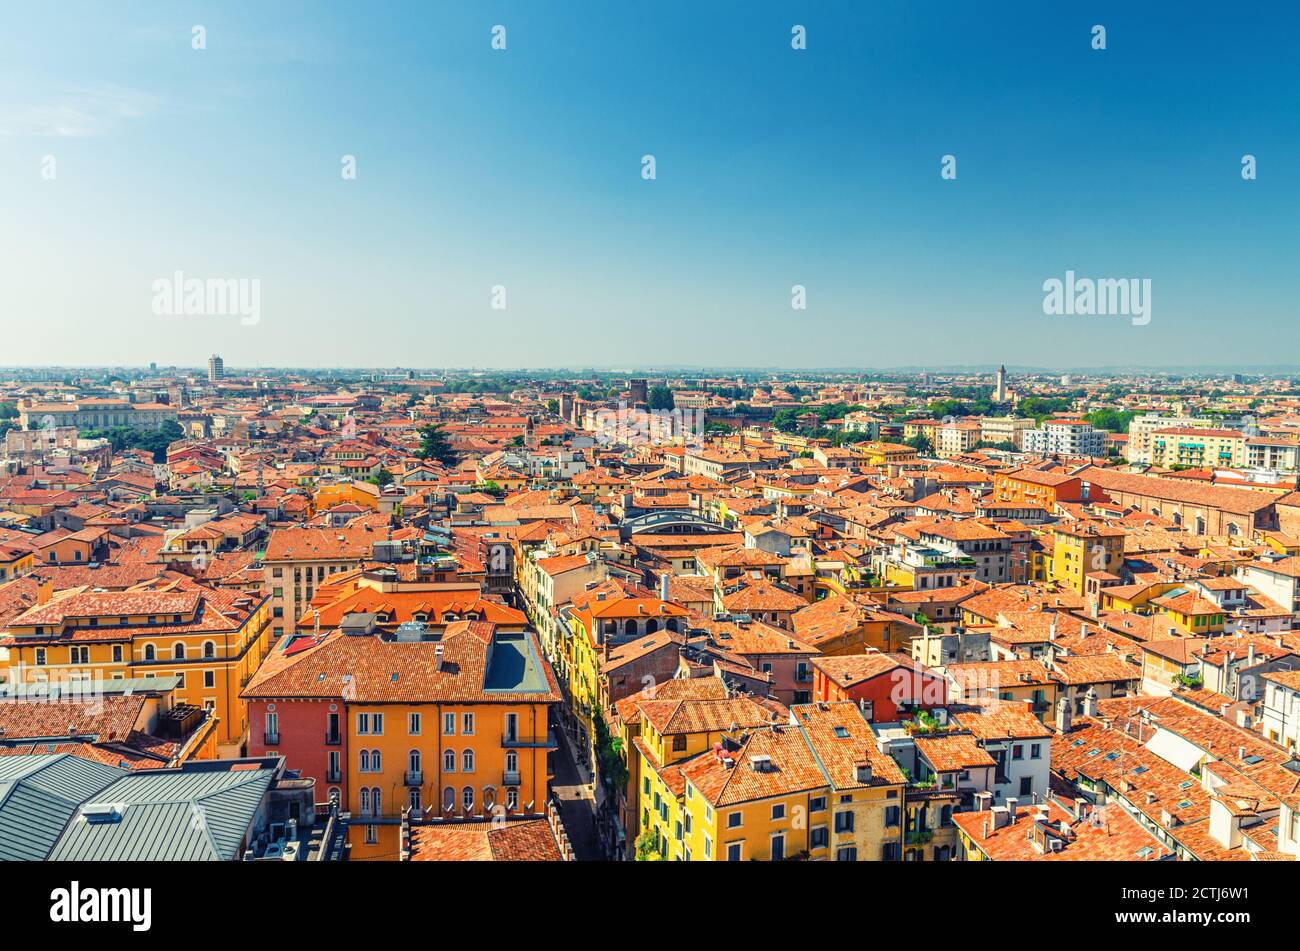 Aerial view of Verona city historical centre Citta Antica with red tiled roof buildings. Panoramic view of cityscape of Verona town. Blue sky background copy space. Veneto Region, Northern Italy Stock Photo